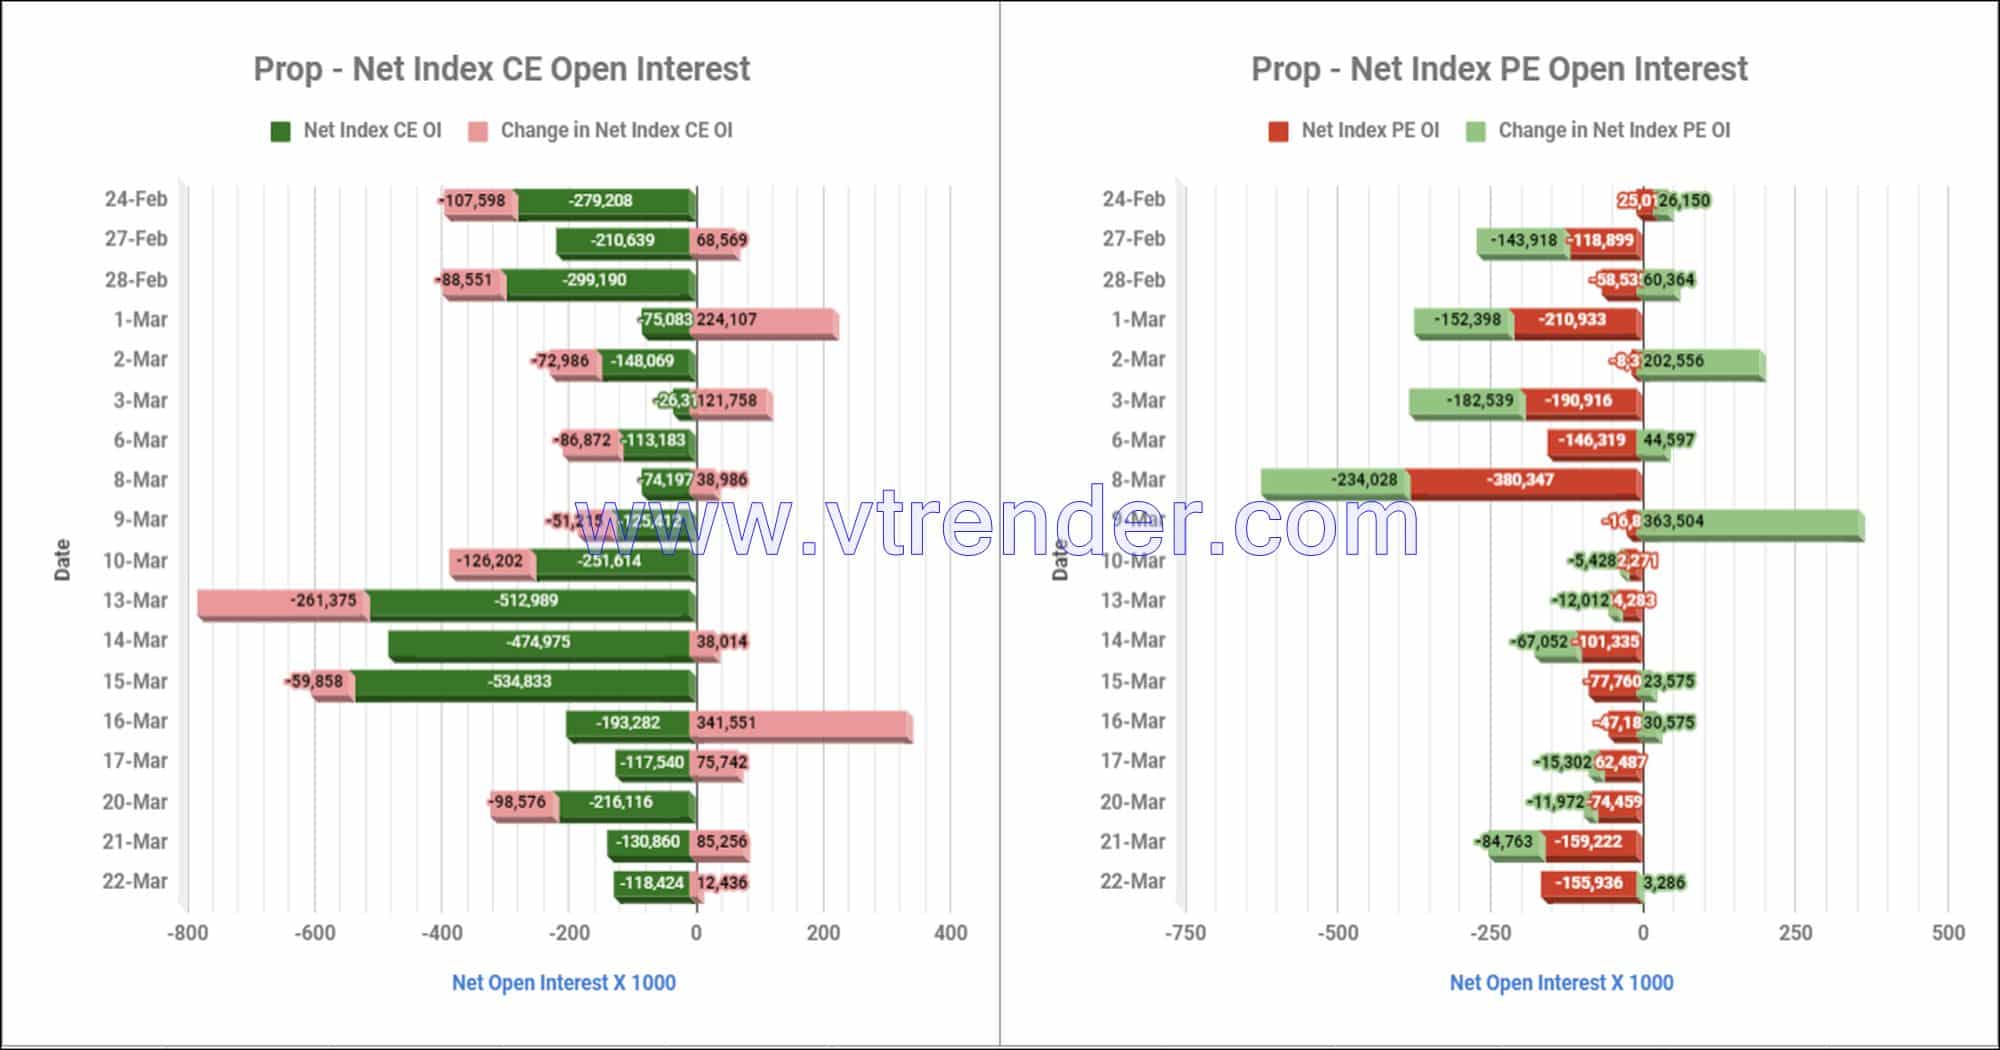 Proinop22Mar Participantwise Net Open Interest And Net Equity Investments – 22Nd Mar 2023 Client, Equity, Fii, Index Futures, Index Options, Open Interest, Prop